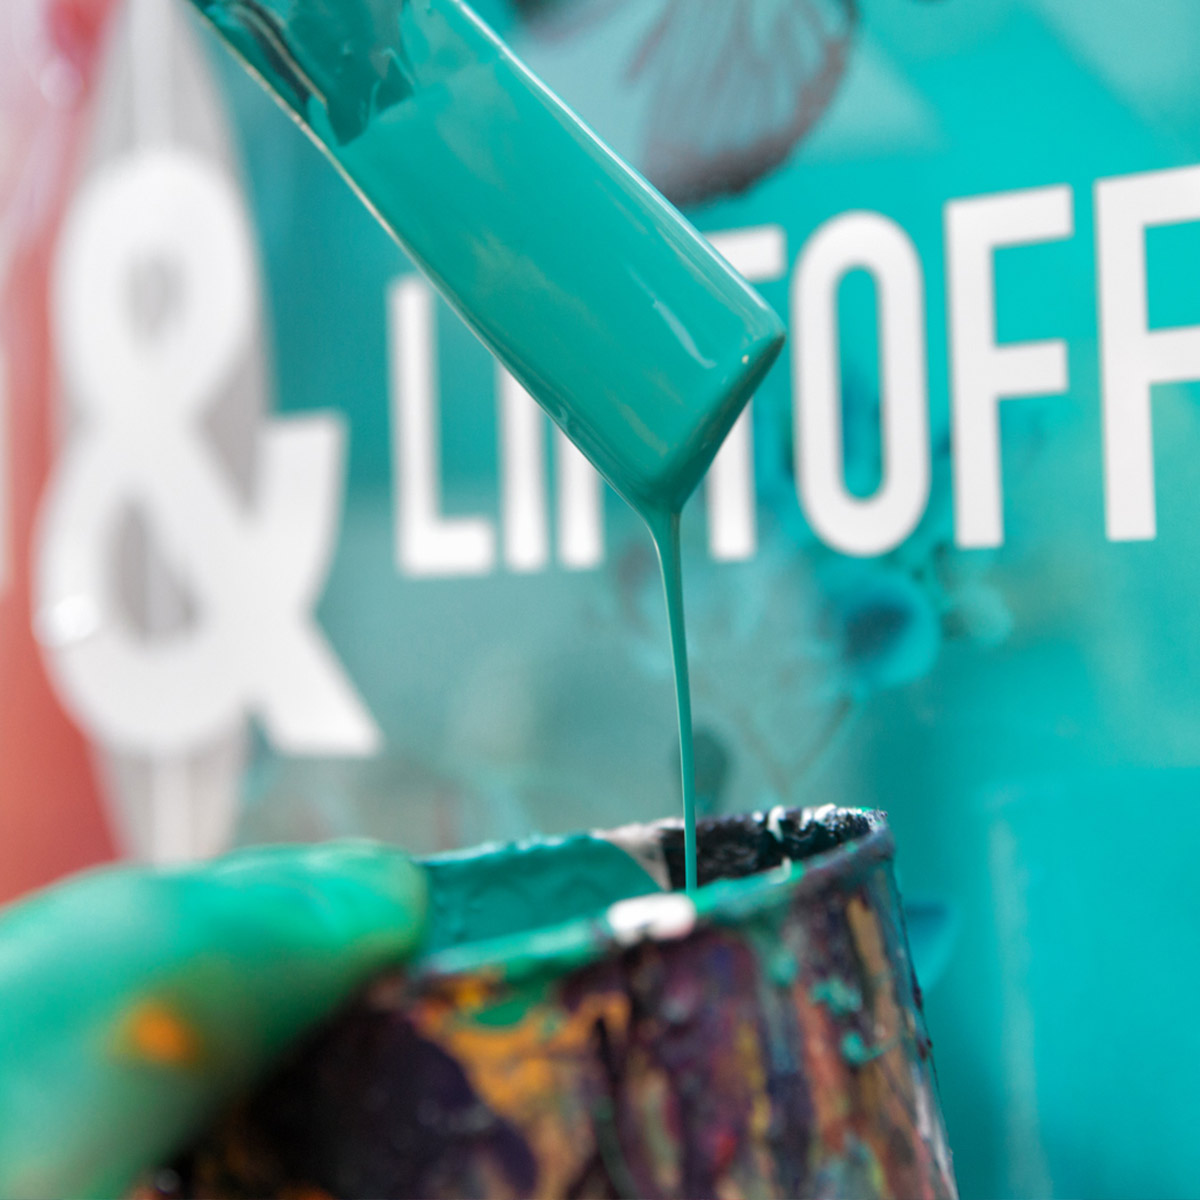 Mixing cyan paint for the Puma mural